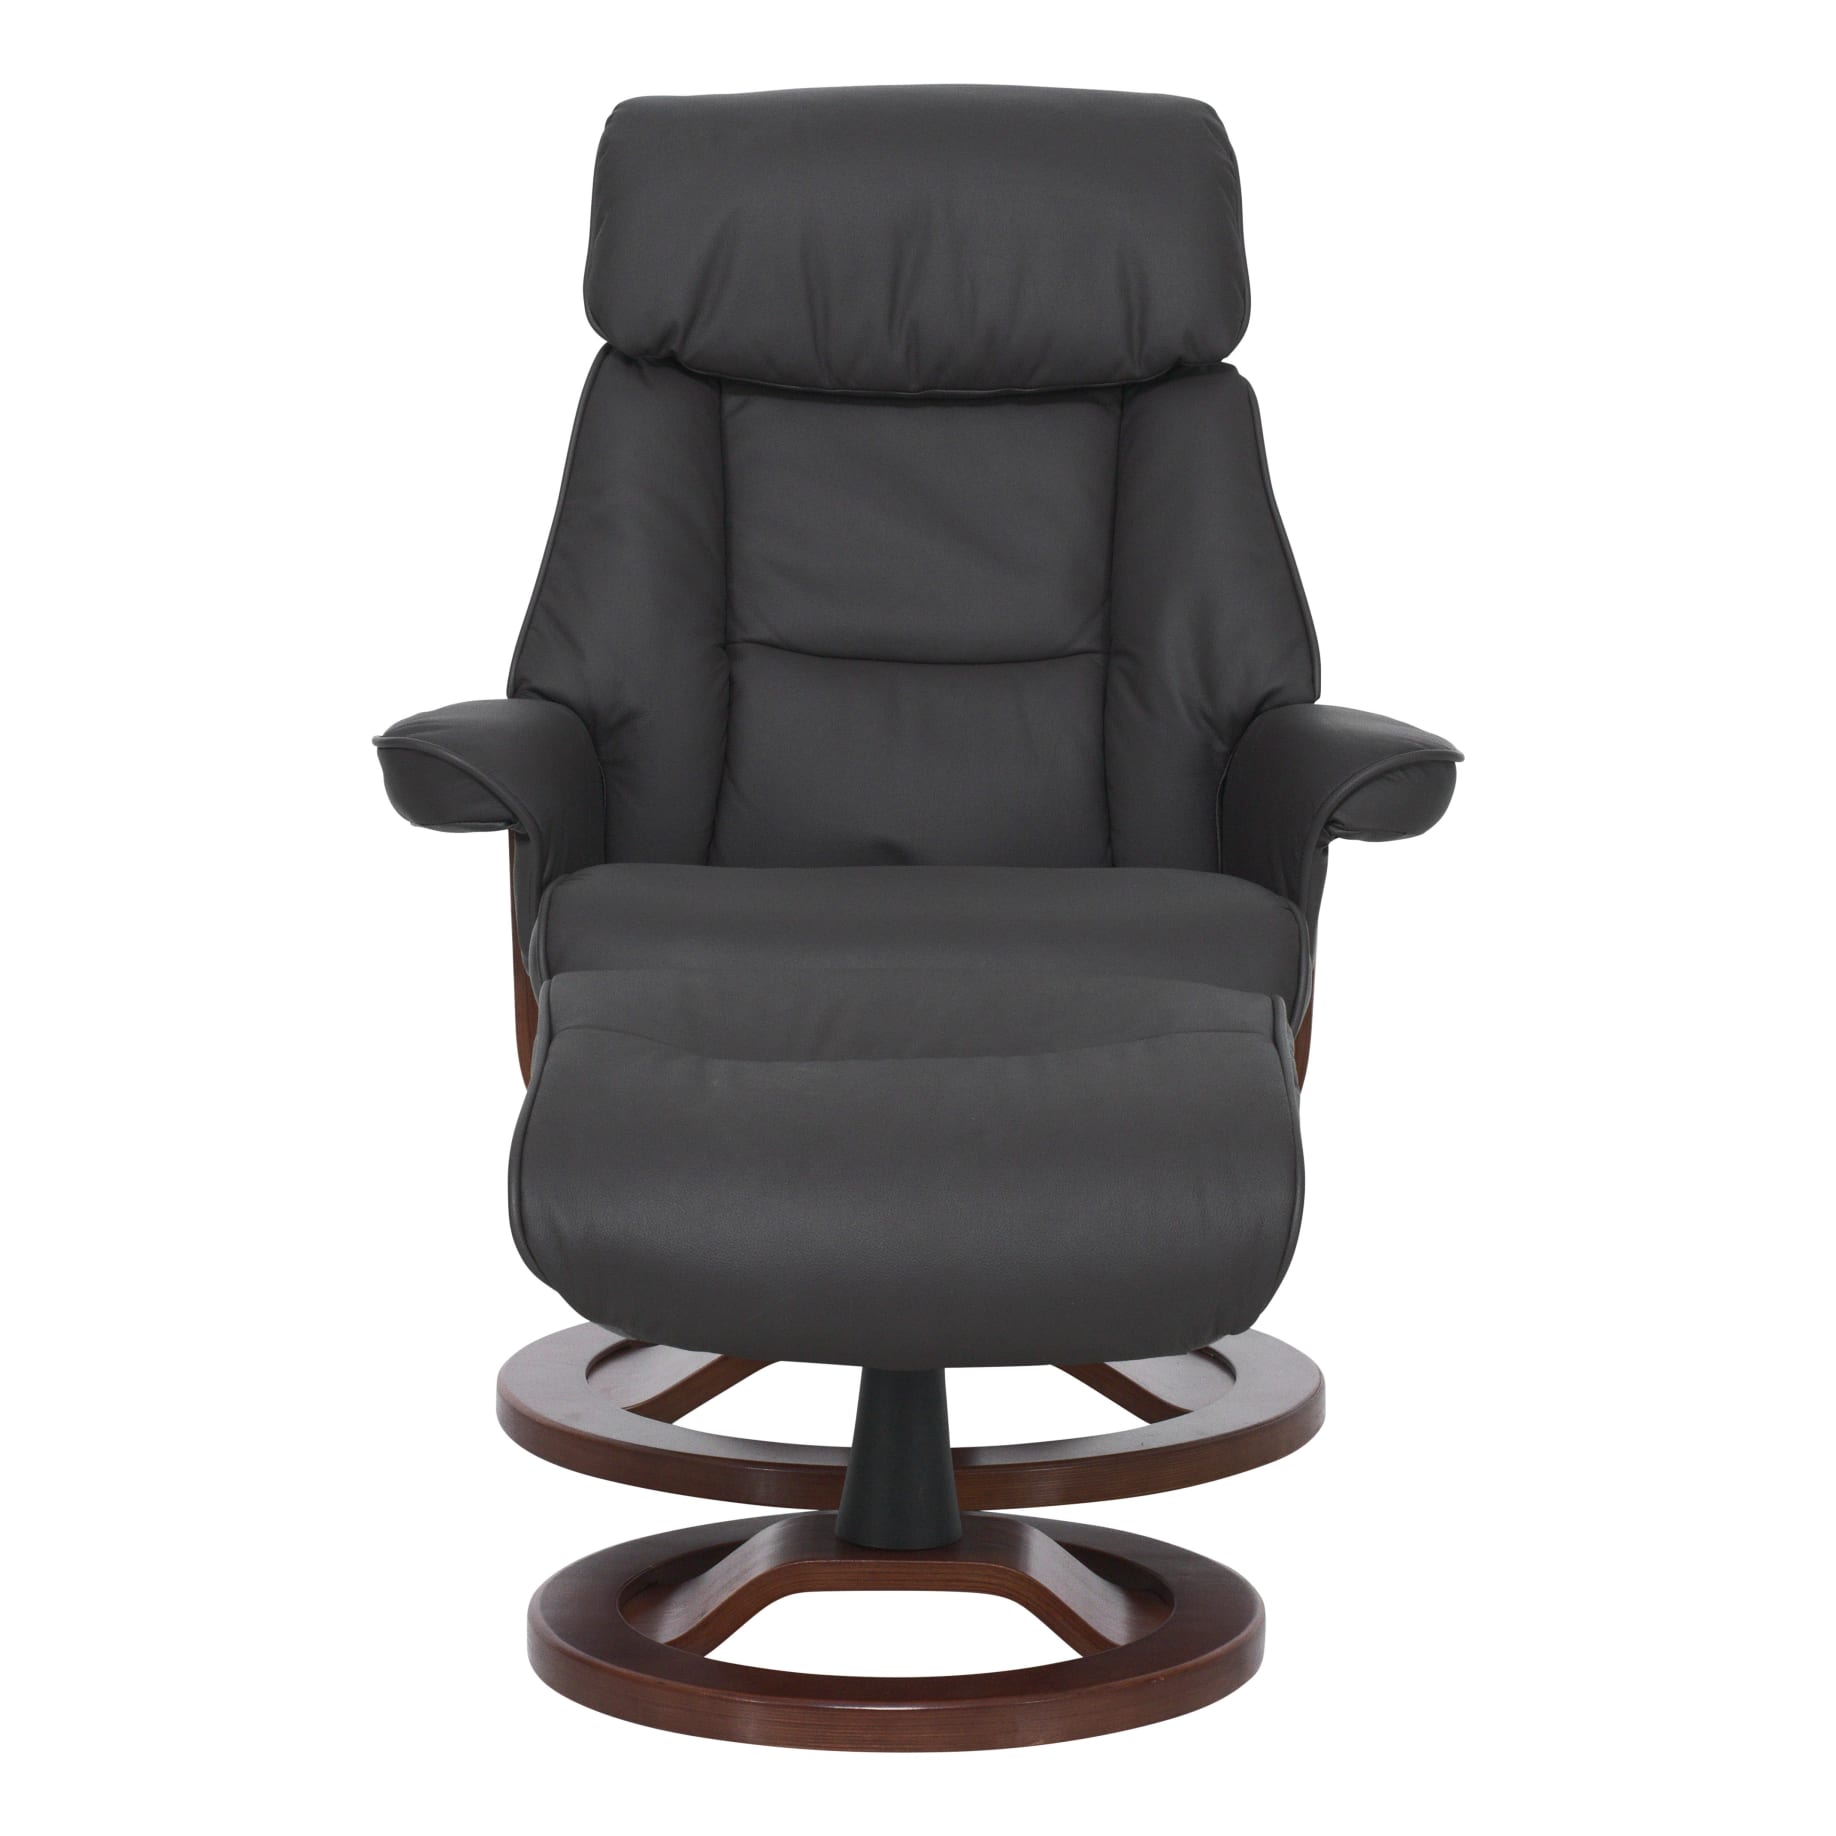 Reggie Recliner + Ottoman in Charcoal/Chocolate